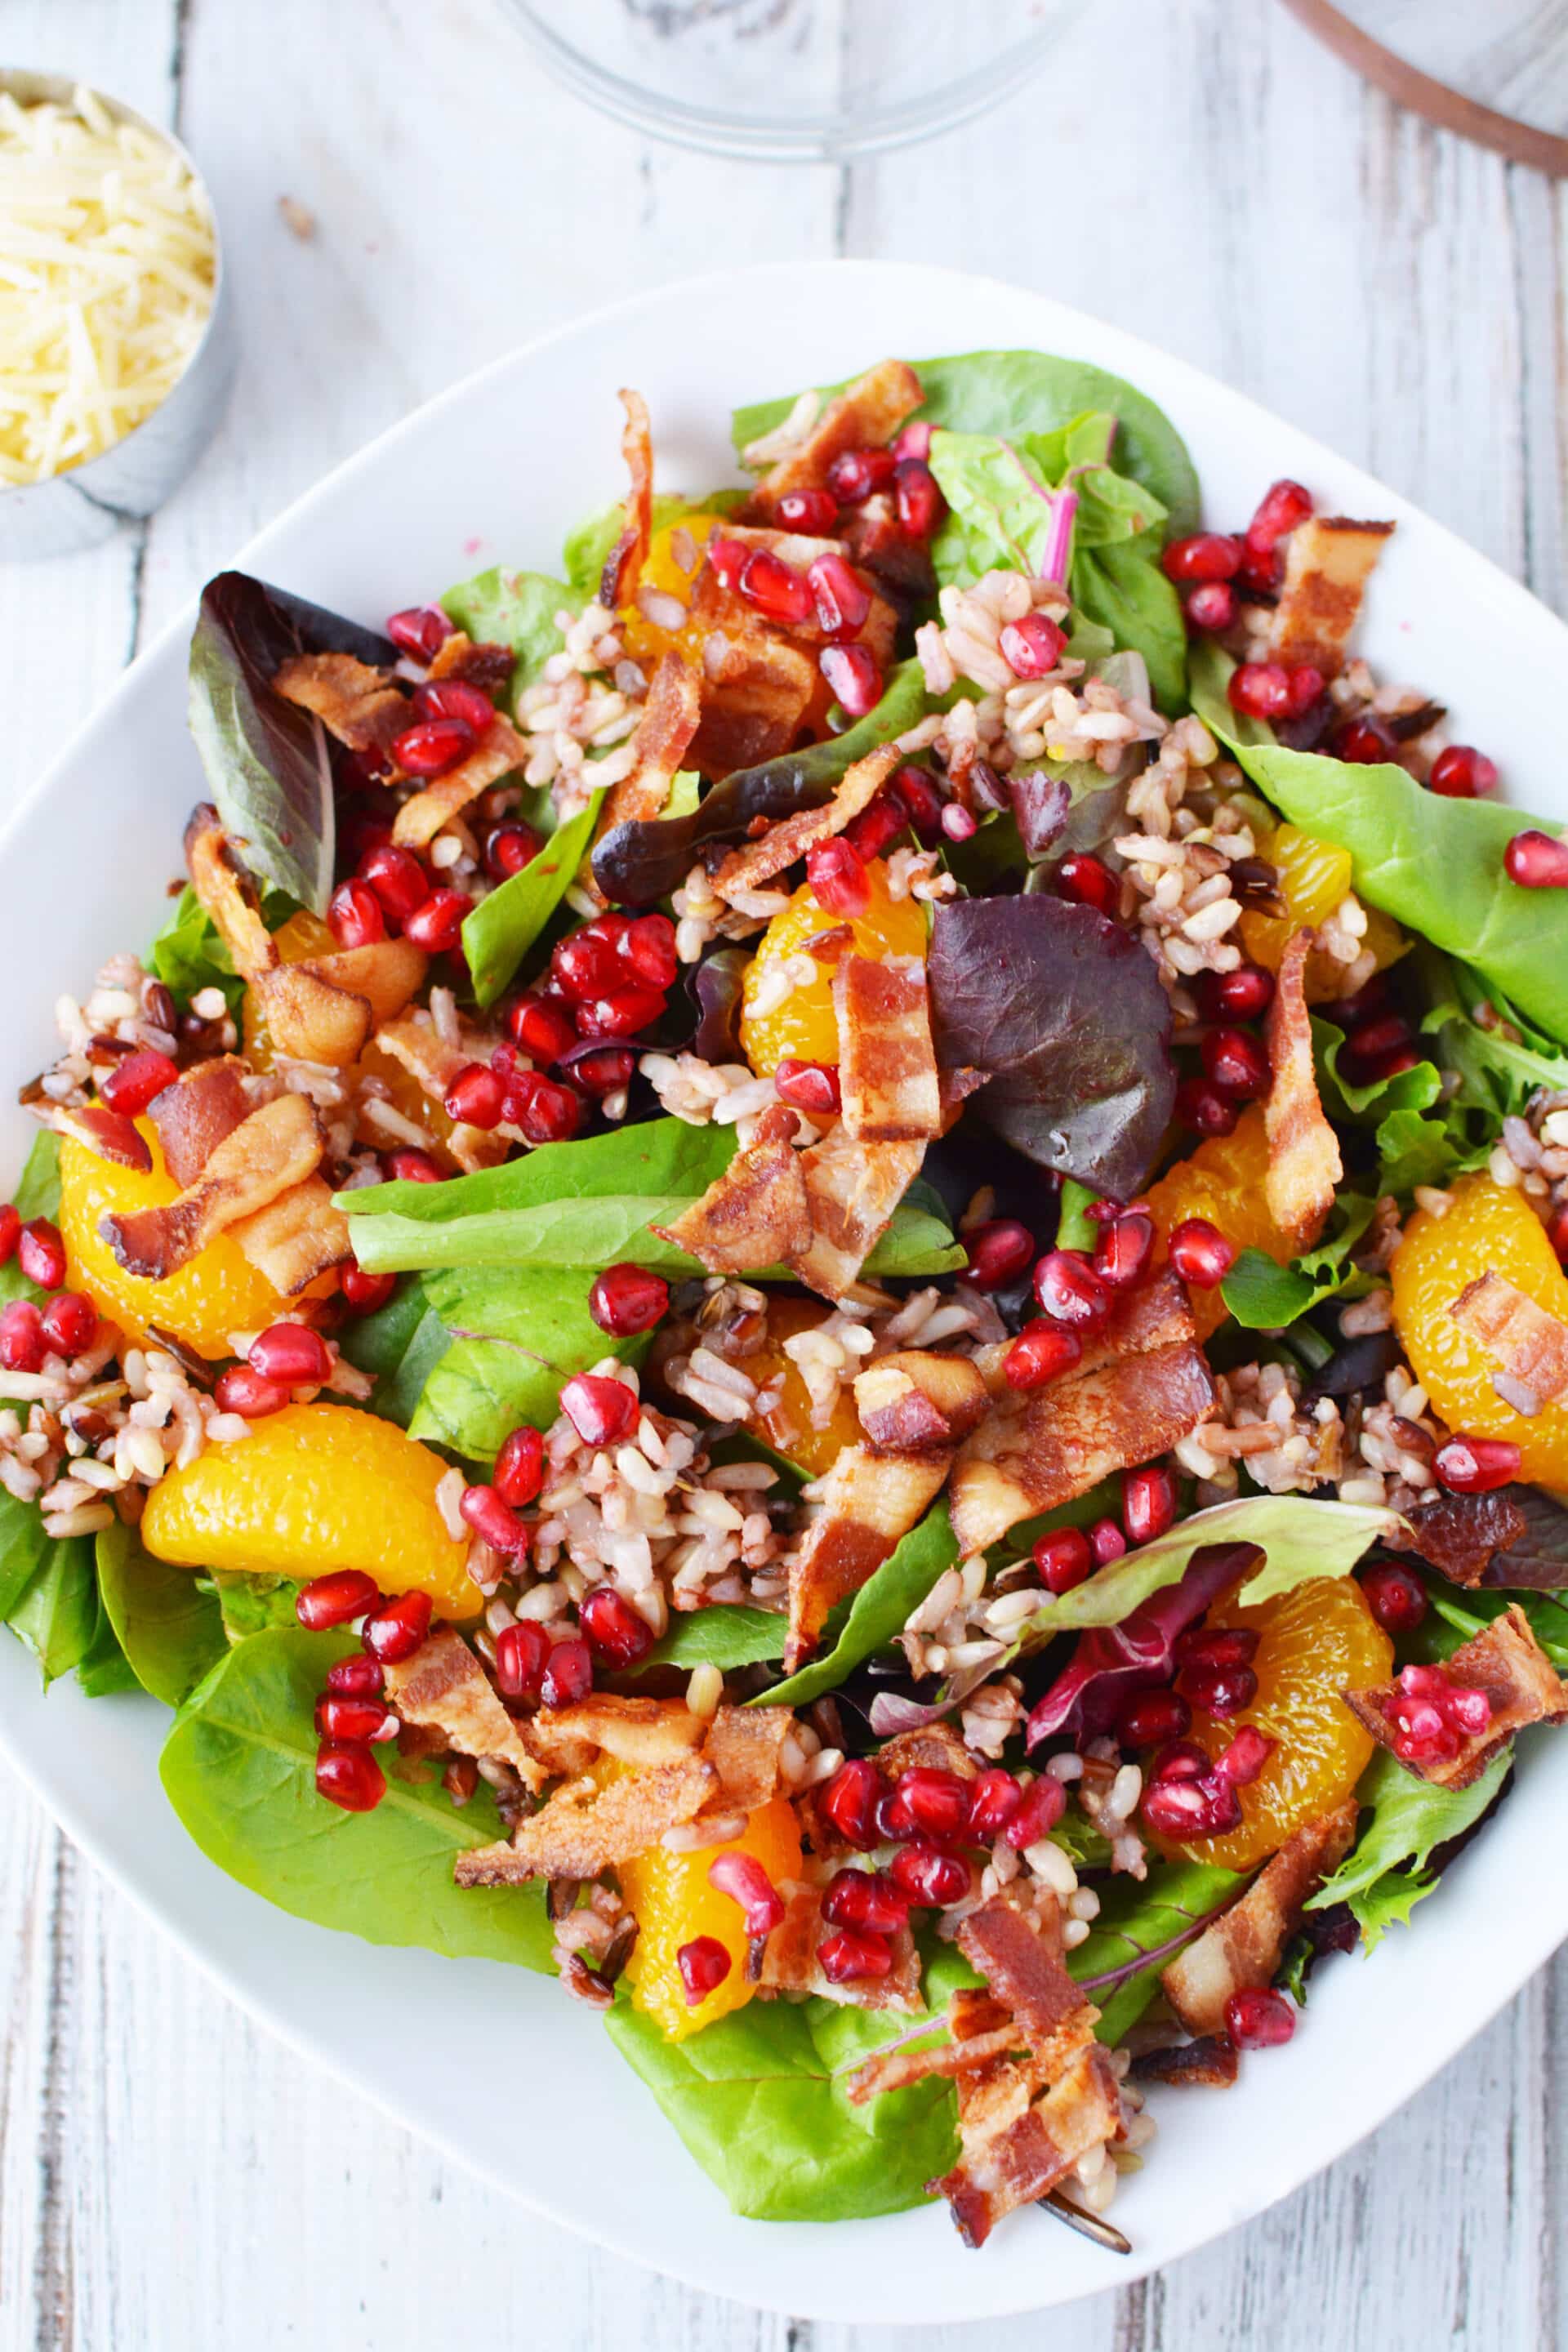 Hearty Winter Salad Recipe - With Pomegranate And Wild Rice - Lady and ...